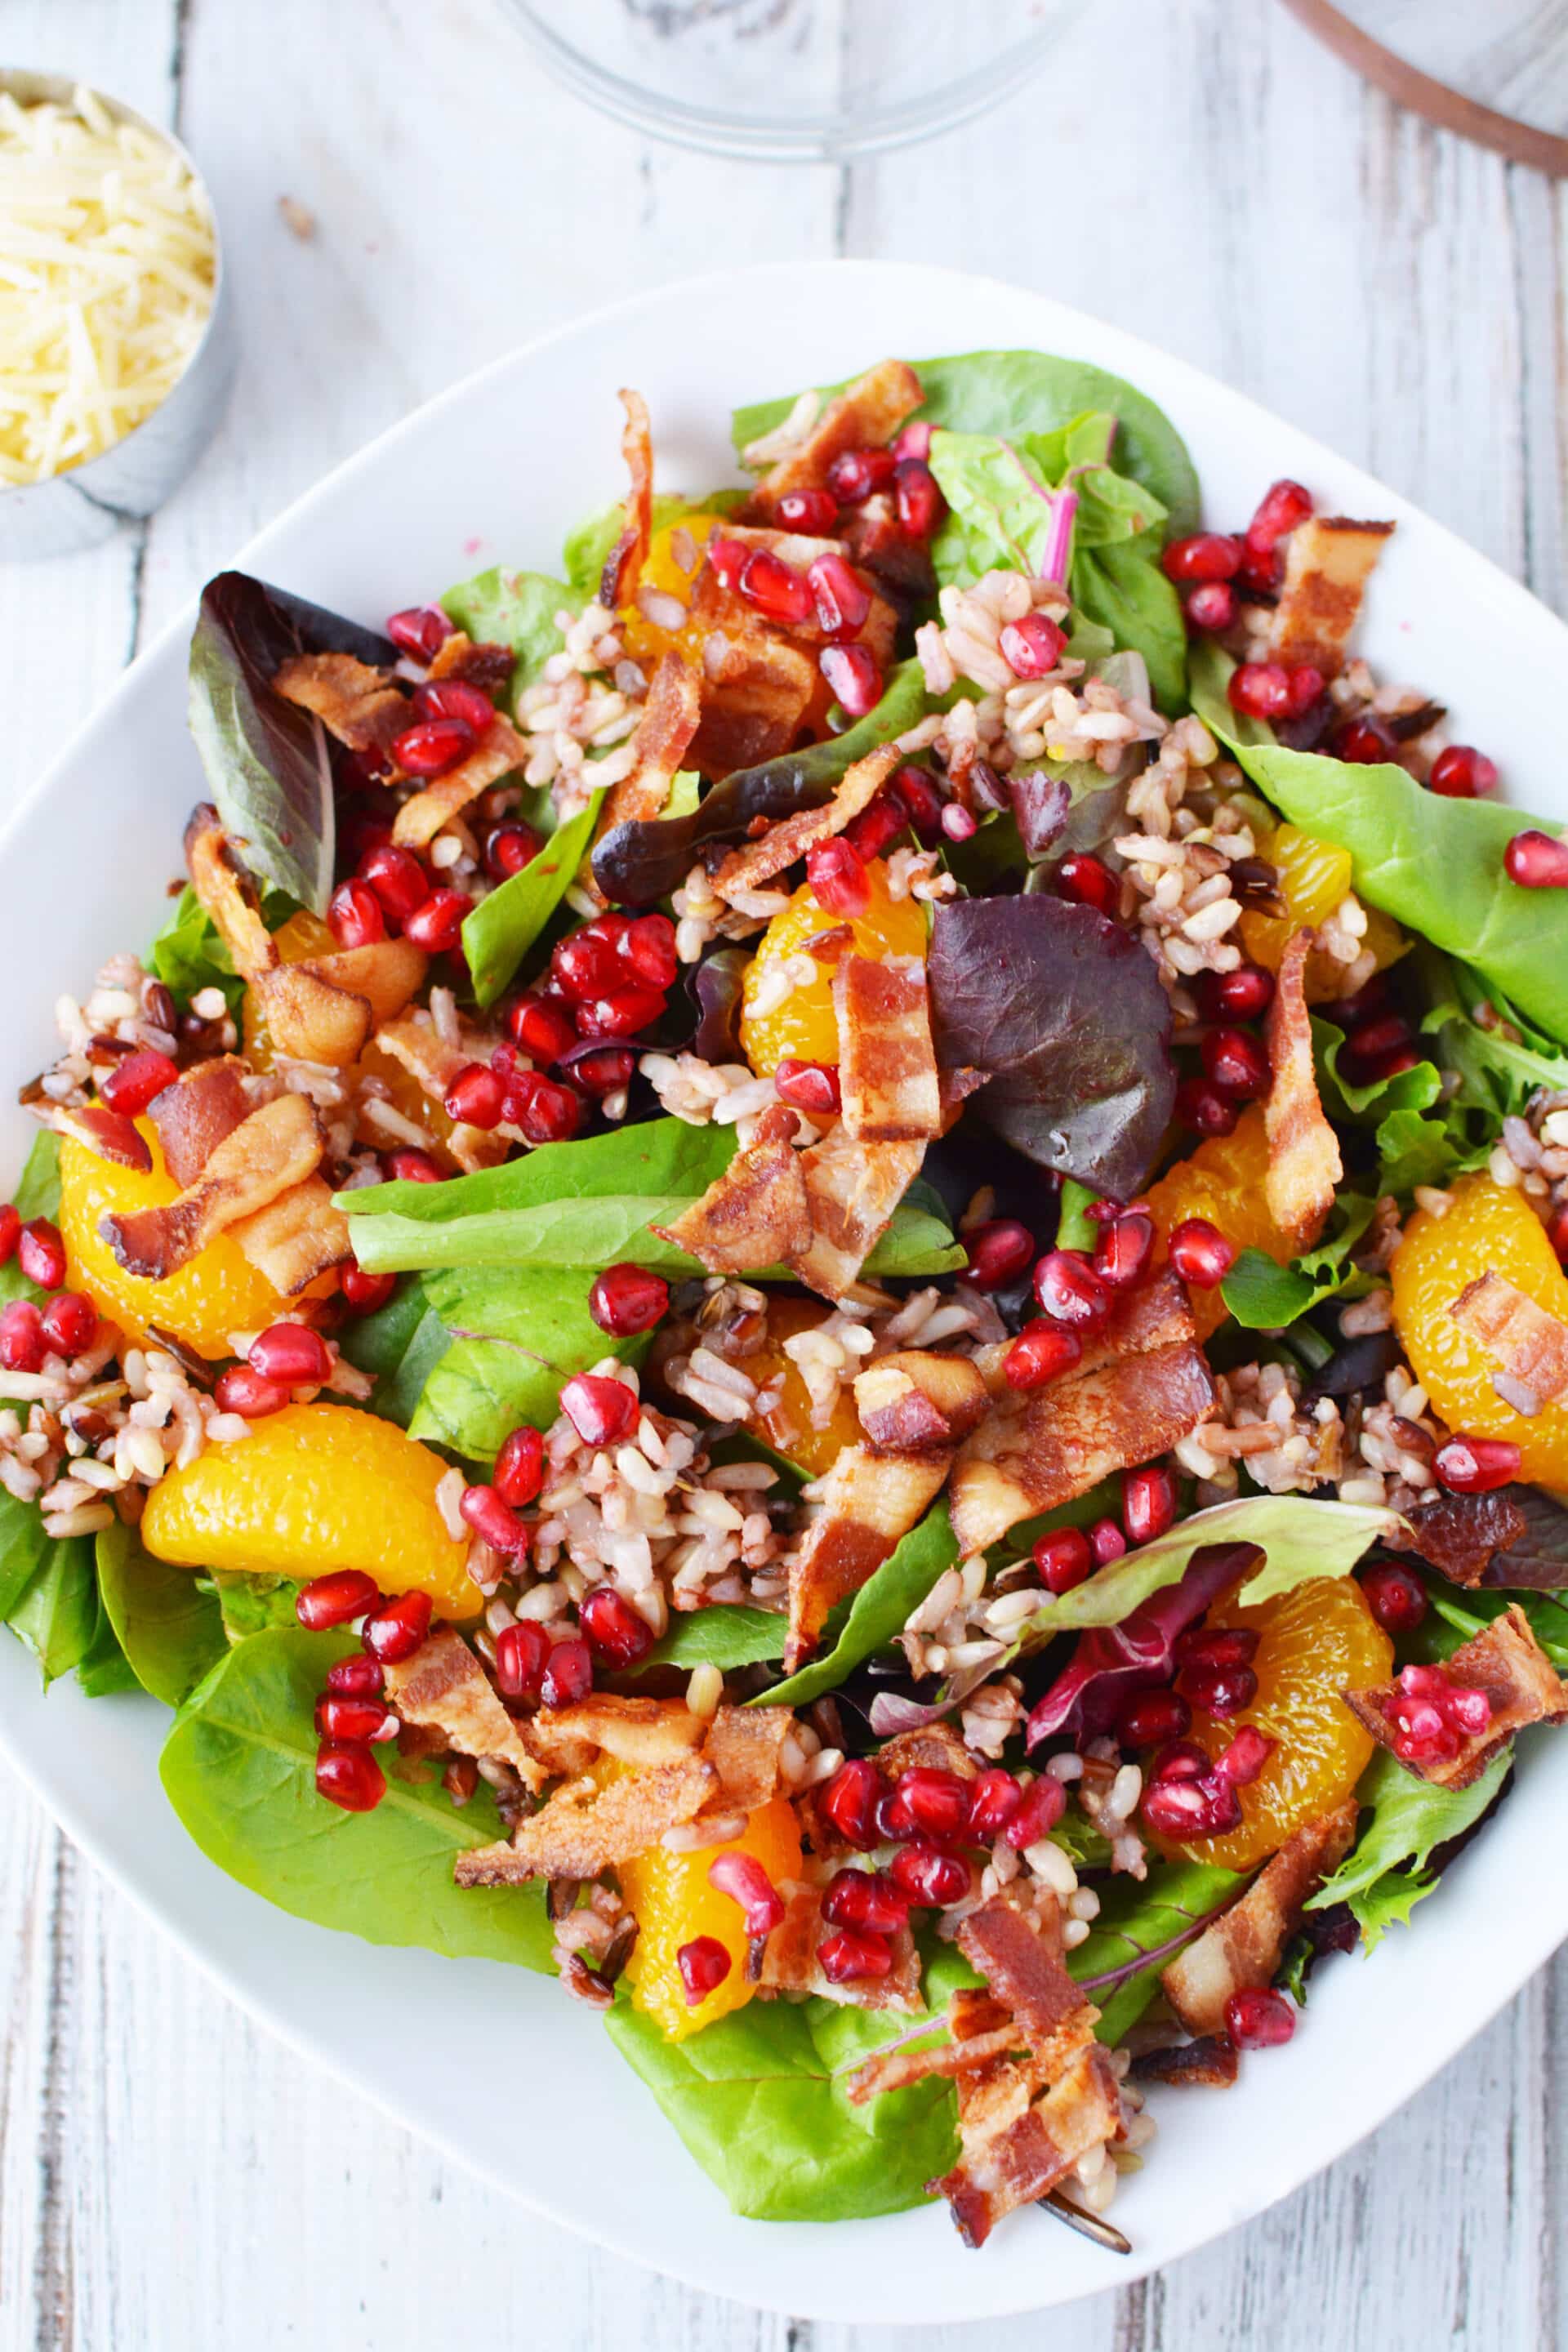 Hearty Winter Salad Recipe - With Pomegranate And Wild Rice - Lady and ...